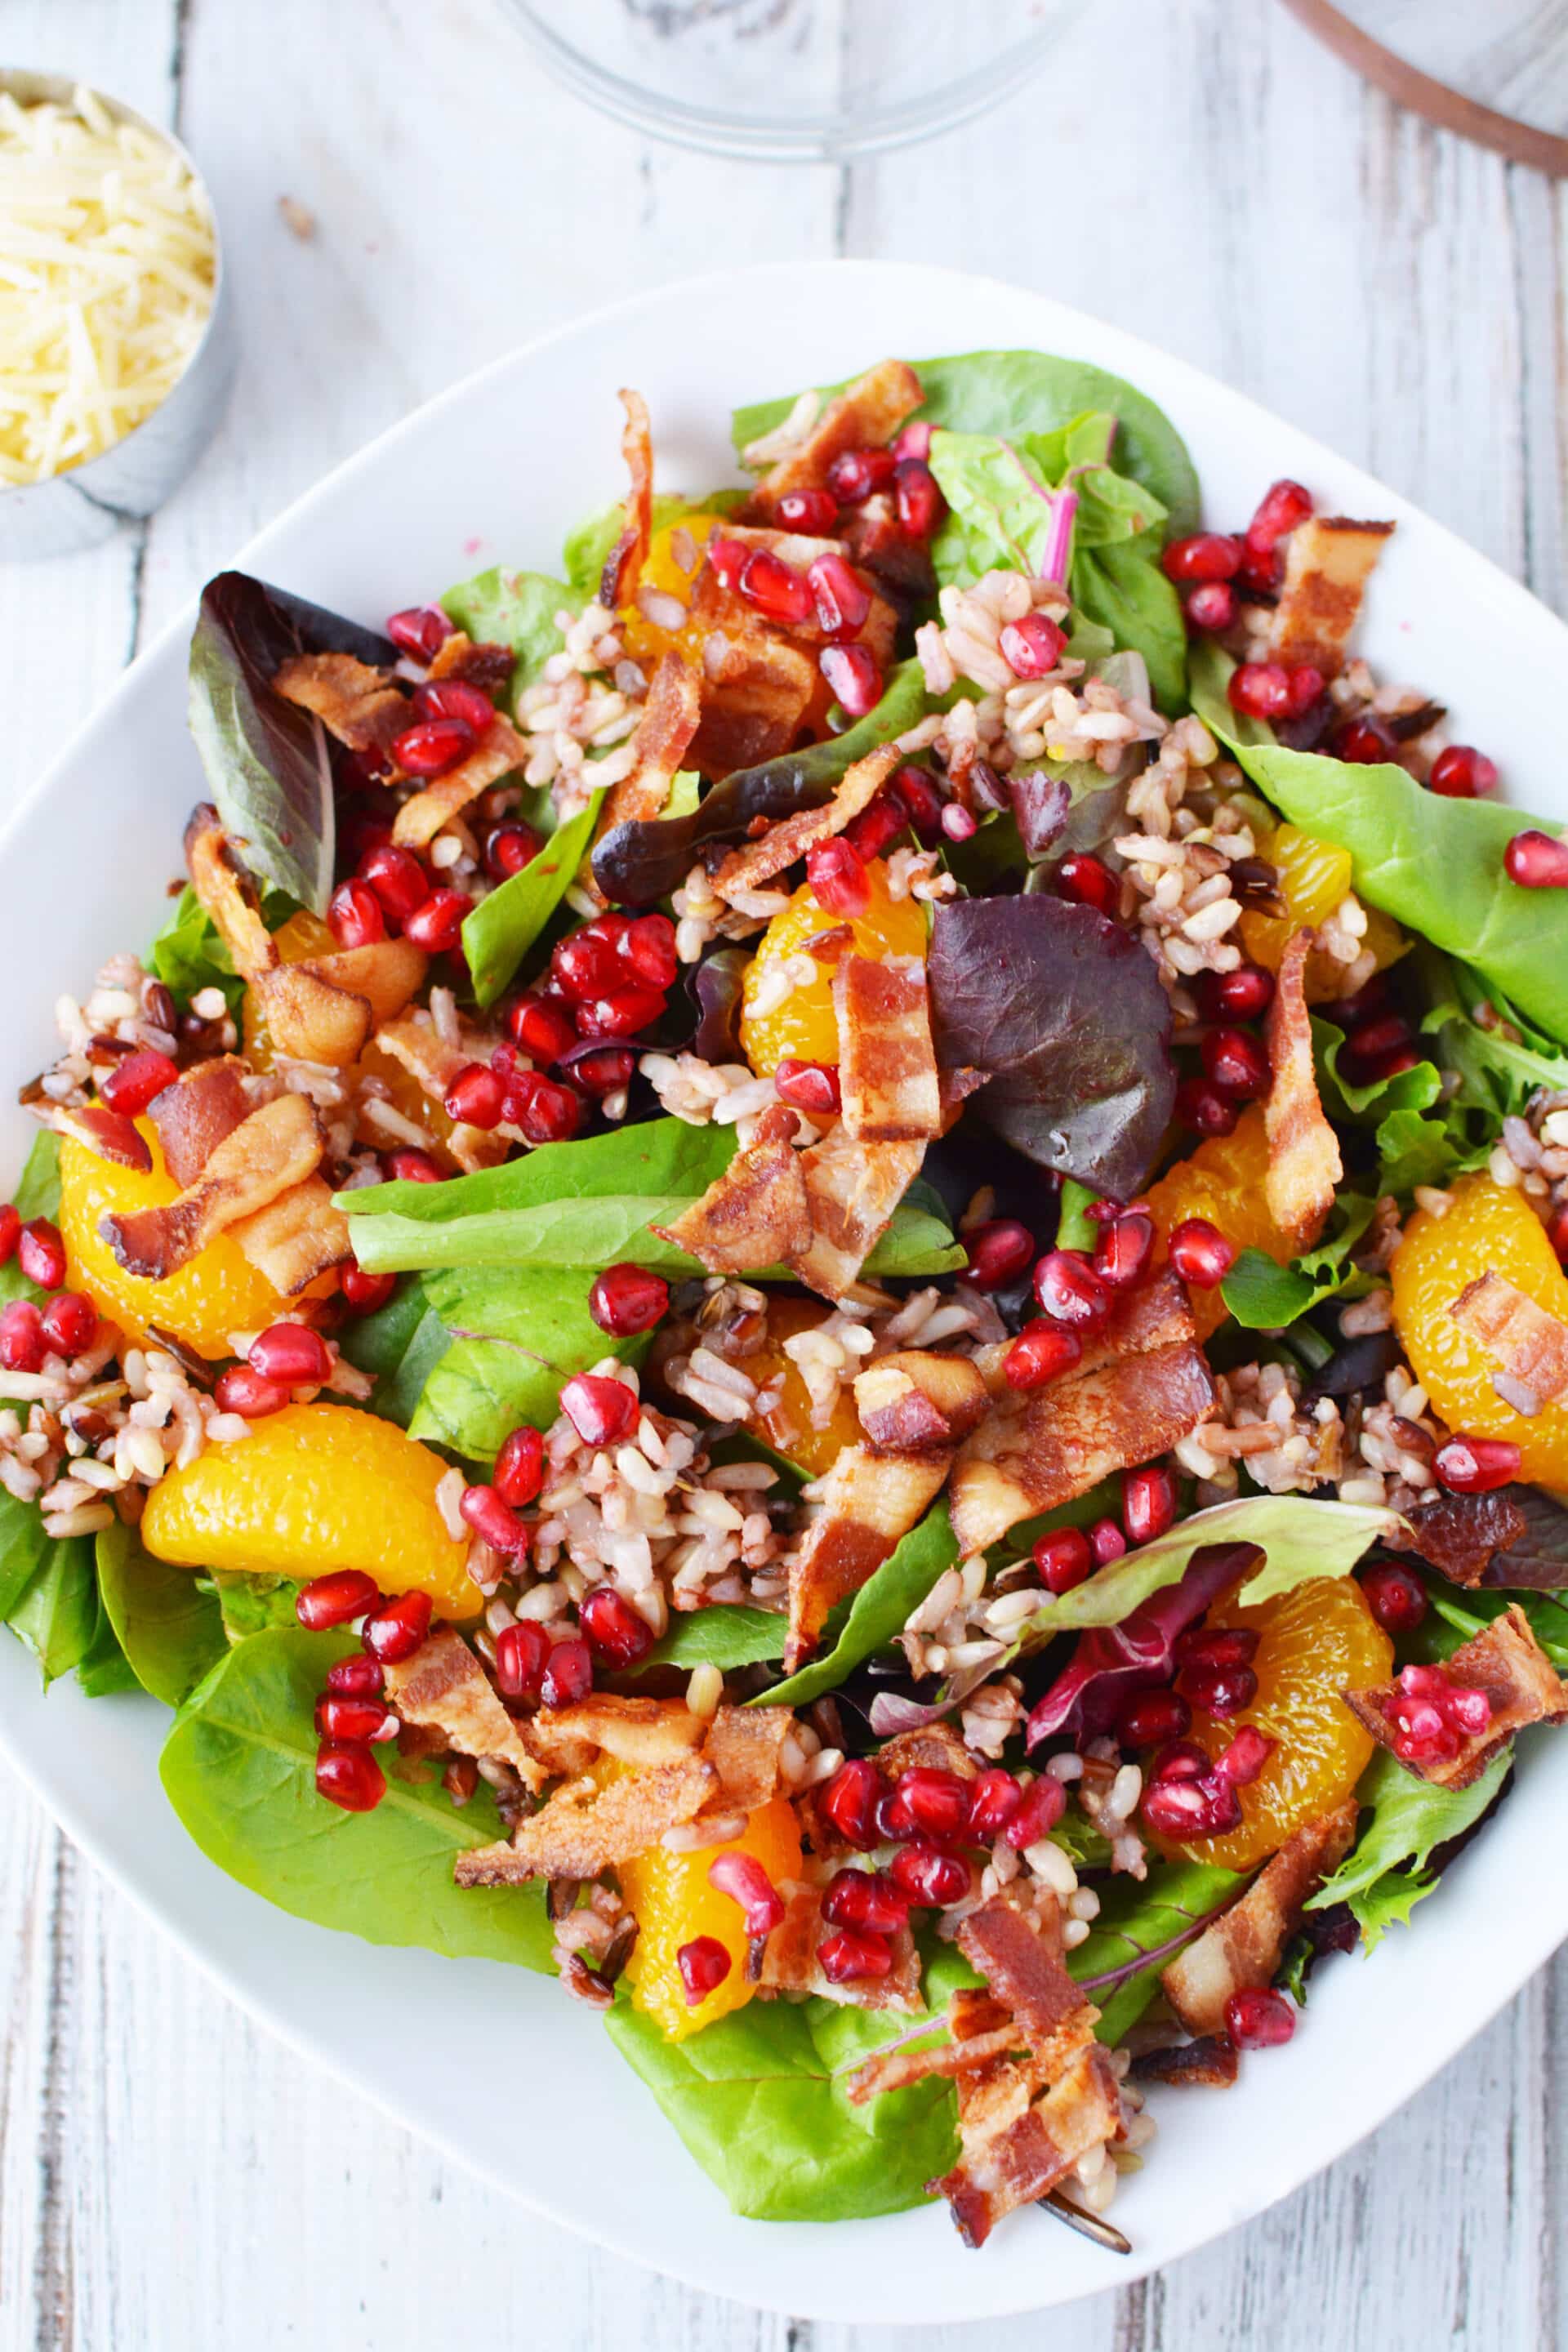 Hearty Winter Salad Recipe - With Pomegranate And Wild Rice - Lady and ...